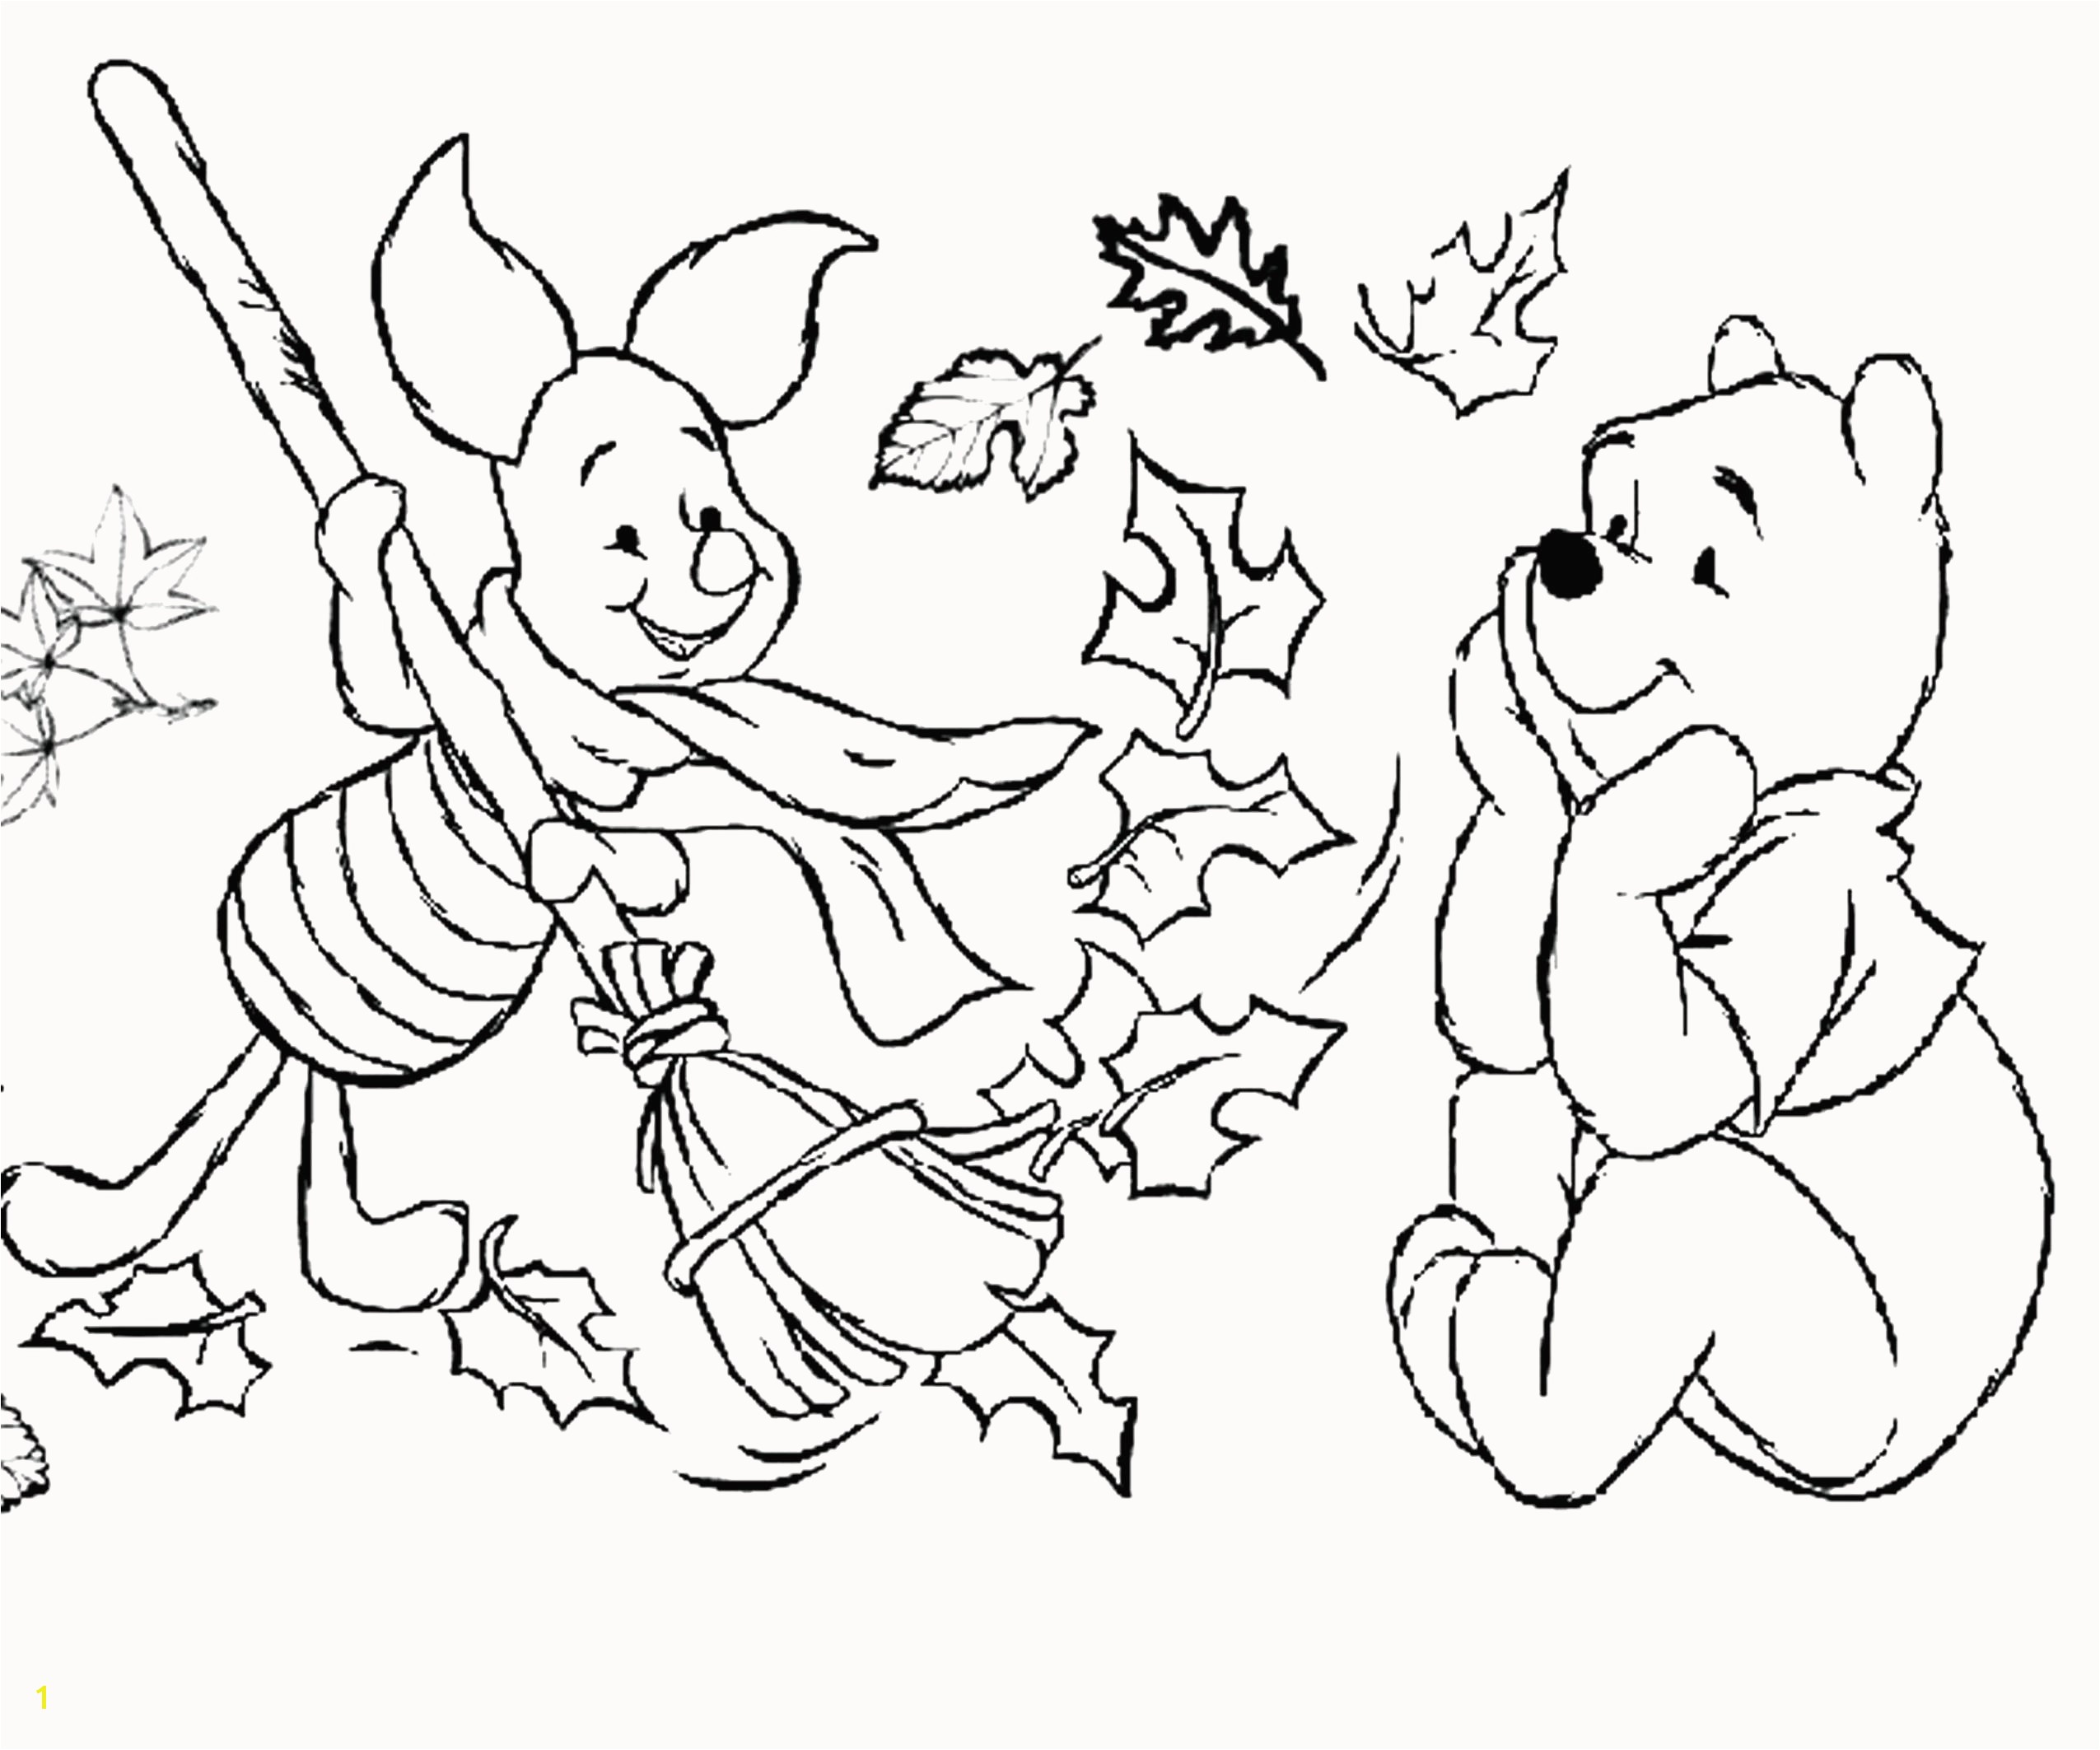 Thunderbolt Coloring Page 25 New Paul and Silas Coloring Page